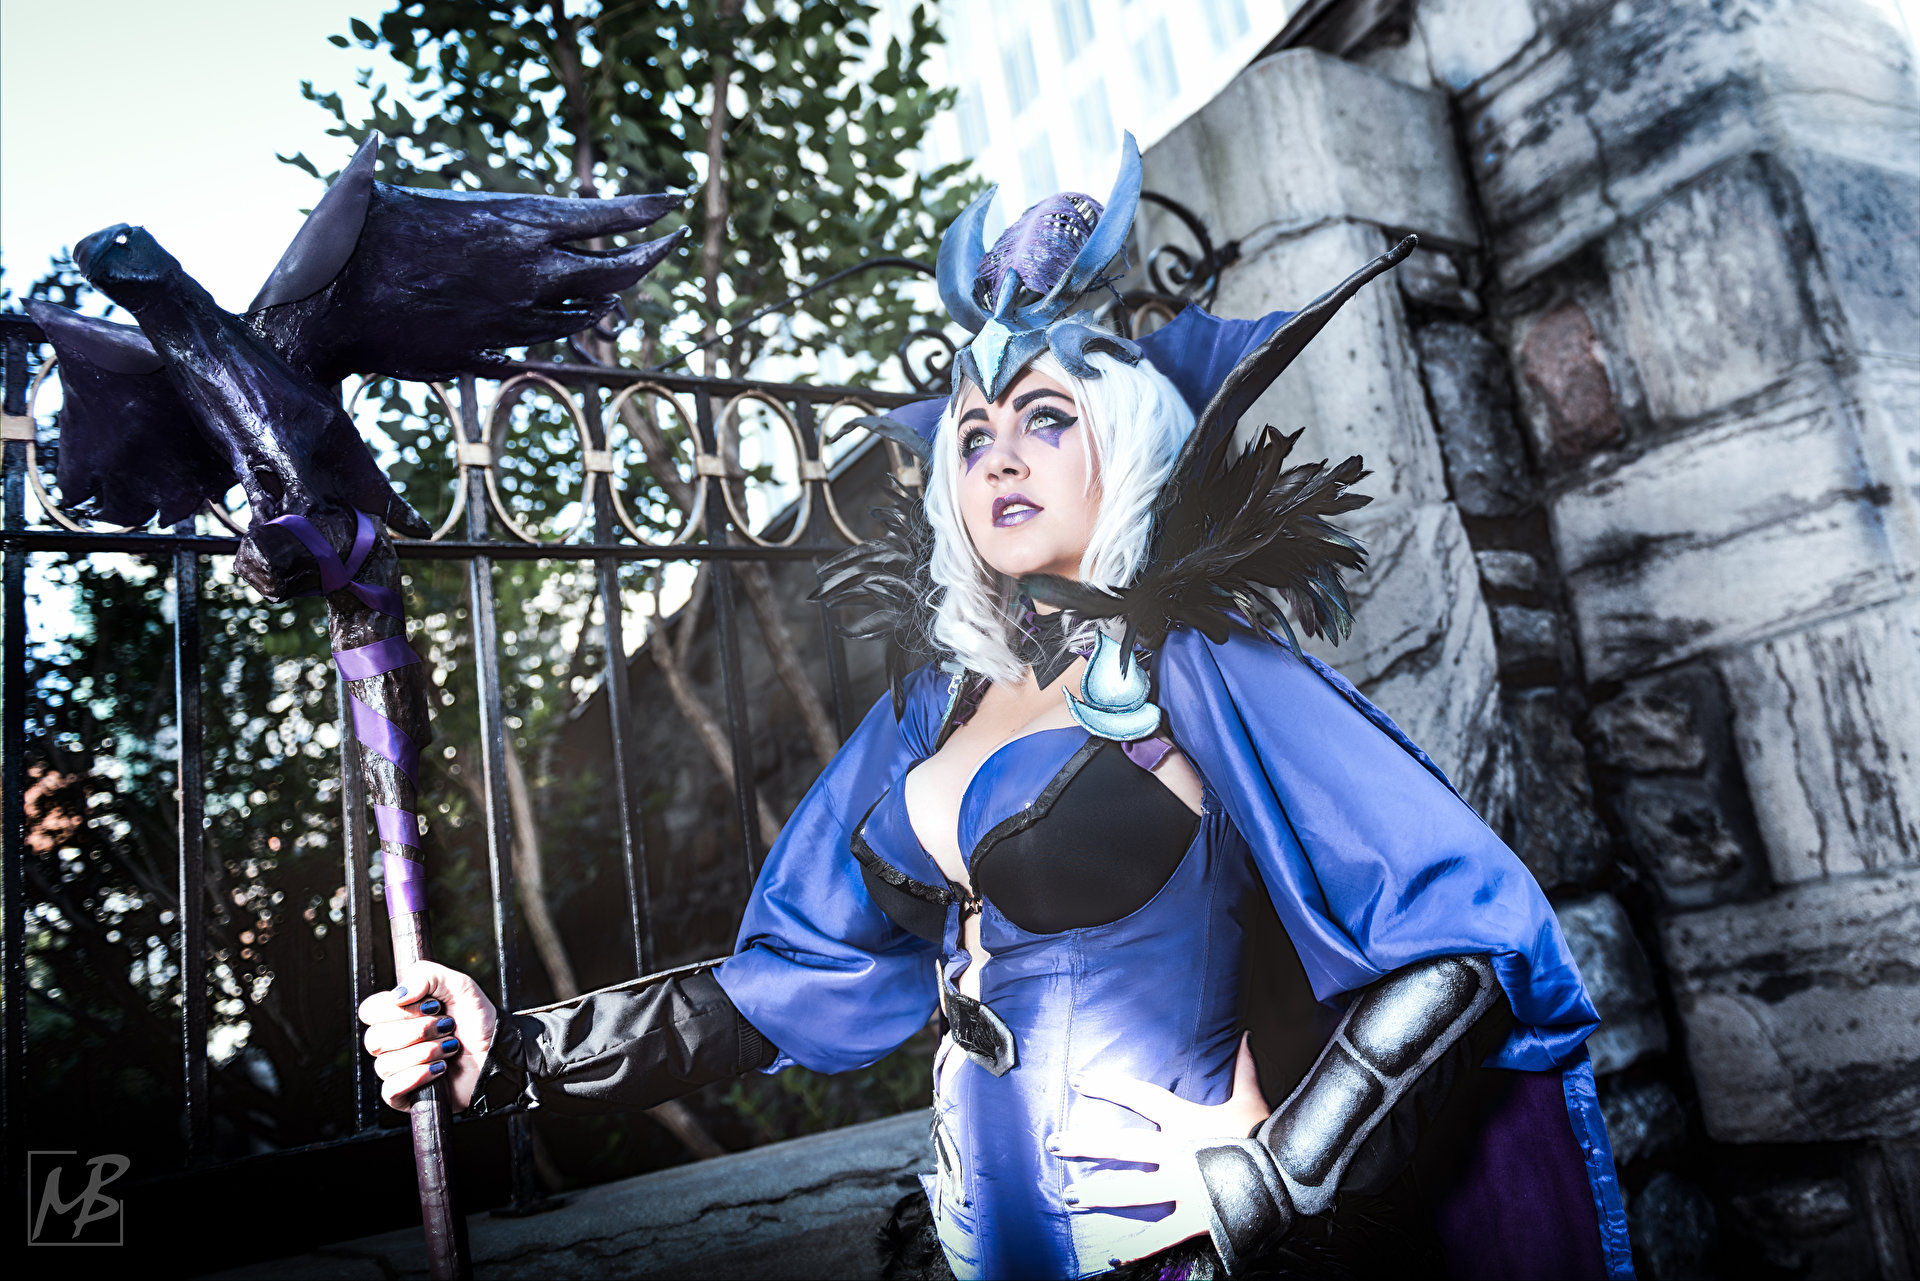 Cospix.net photo featuring Martie B. Photographie and Audrey D. Cosplay